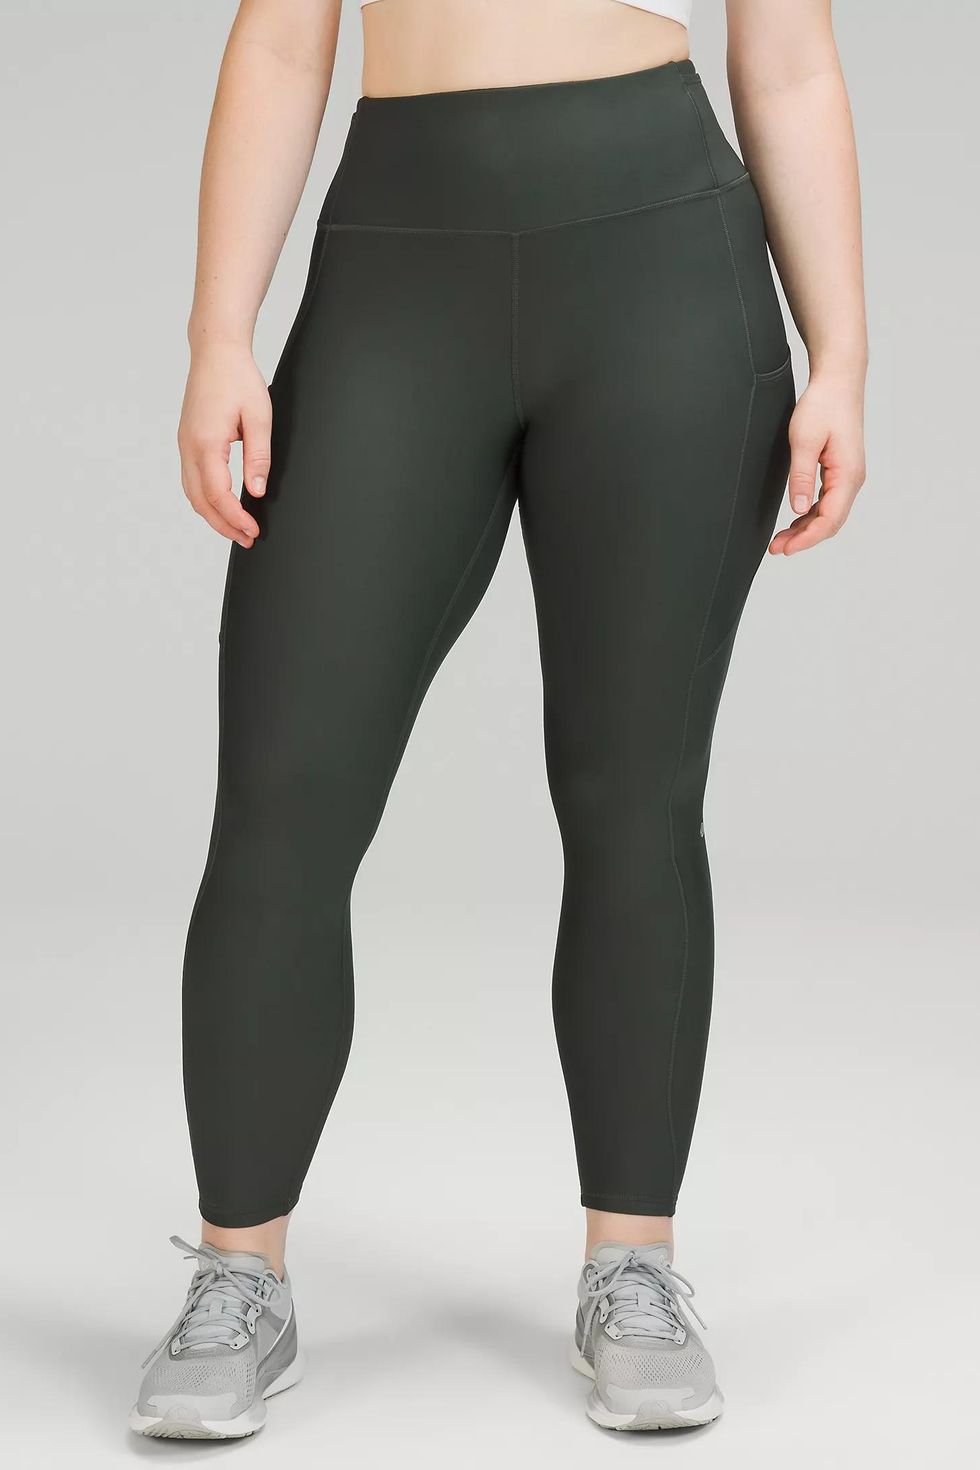 Lululemon Fast and Free High-Rise Fleece Tight 28"